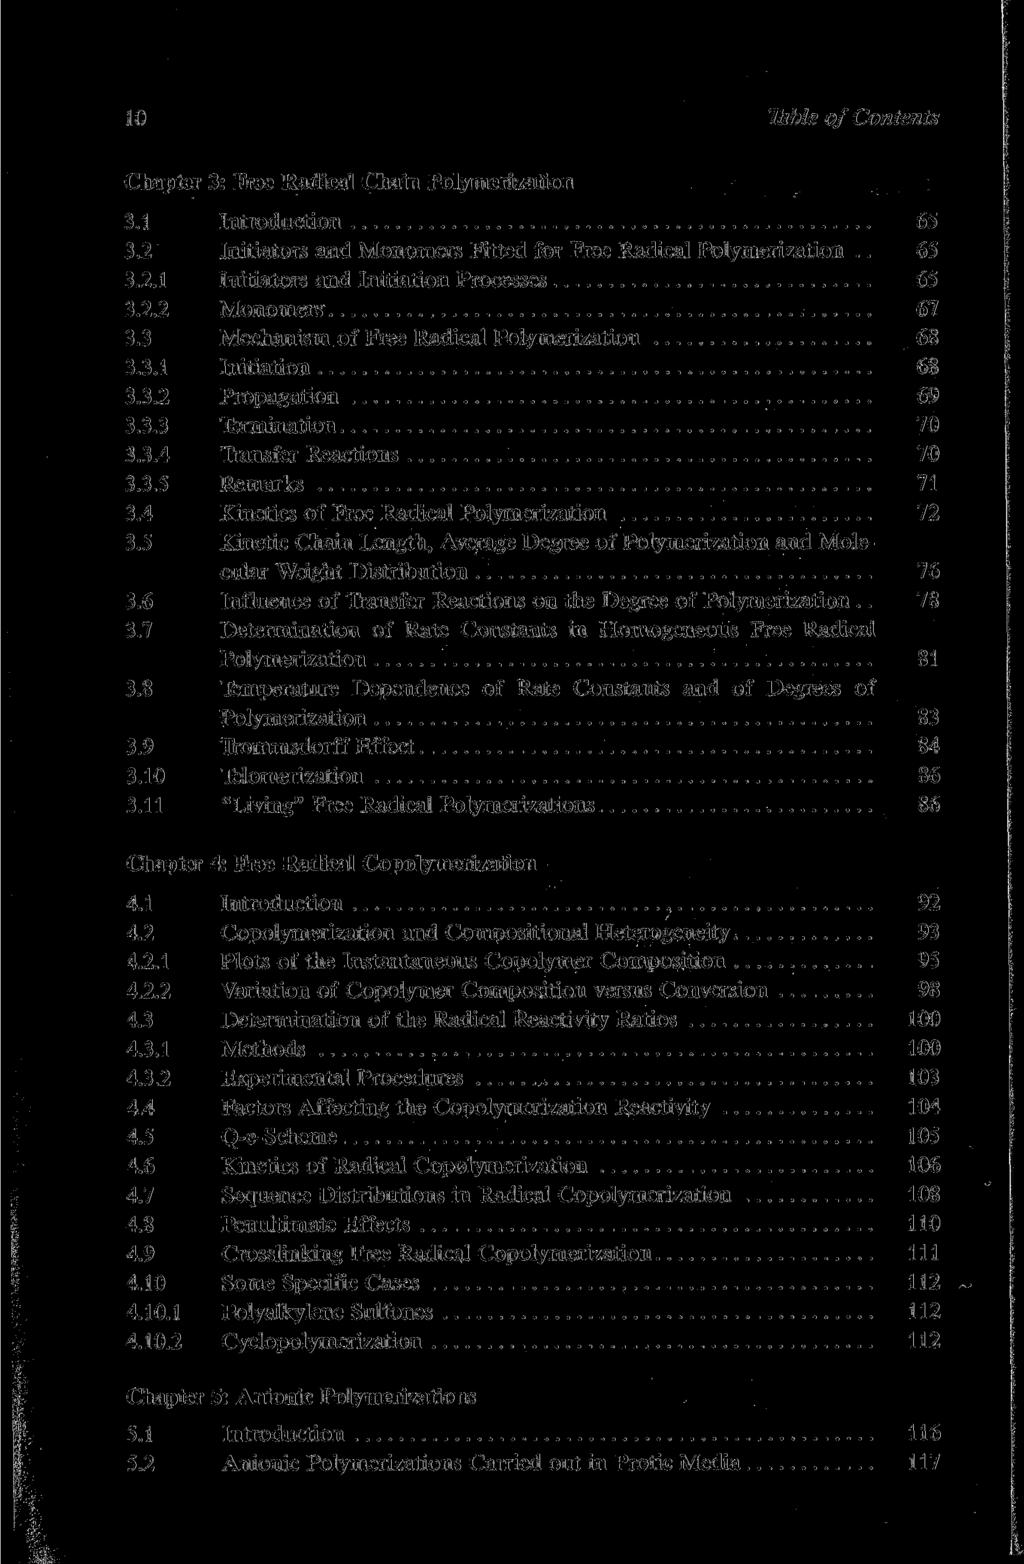 10 Table of Contents Chapter 3: free Radical Chain Polymerization 3.1 Introduction 65 3.2 Initiators and Monomers Fitted for Free Radical Polymerization.. 65 3.2.1 Initiators and Initiation Processes 65 3.